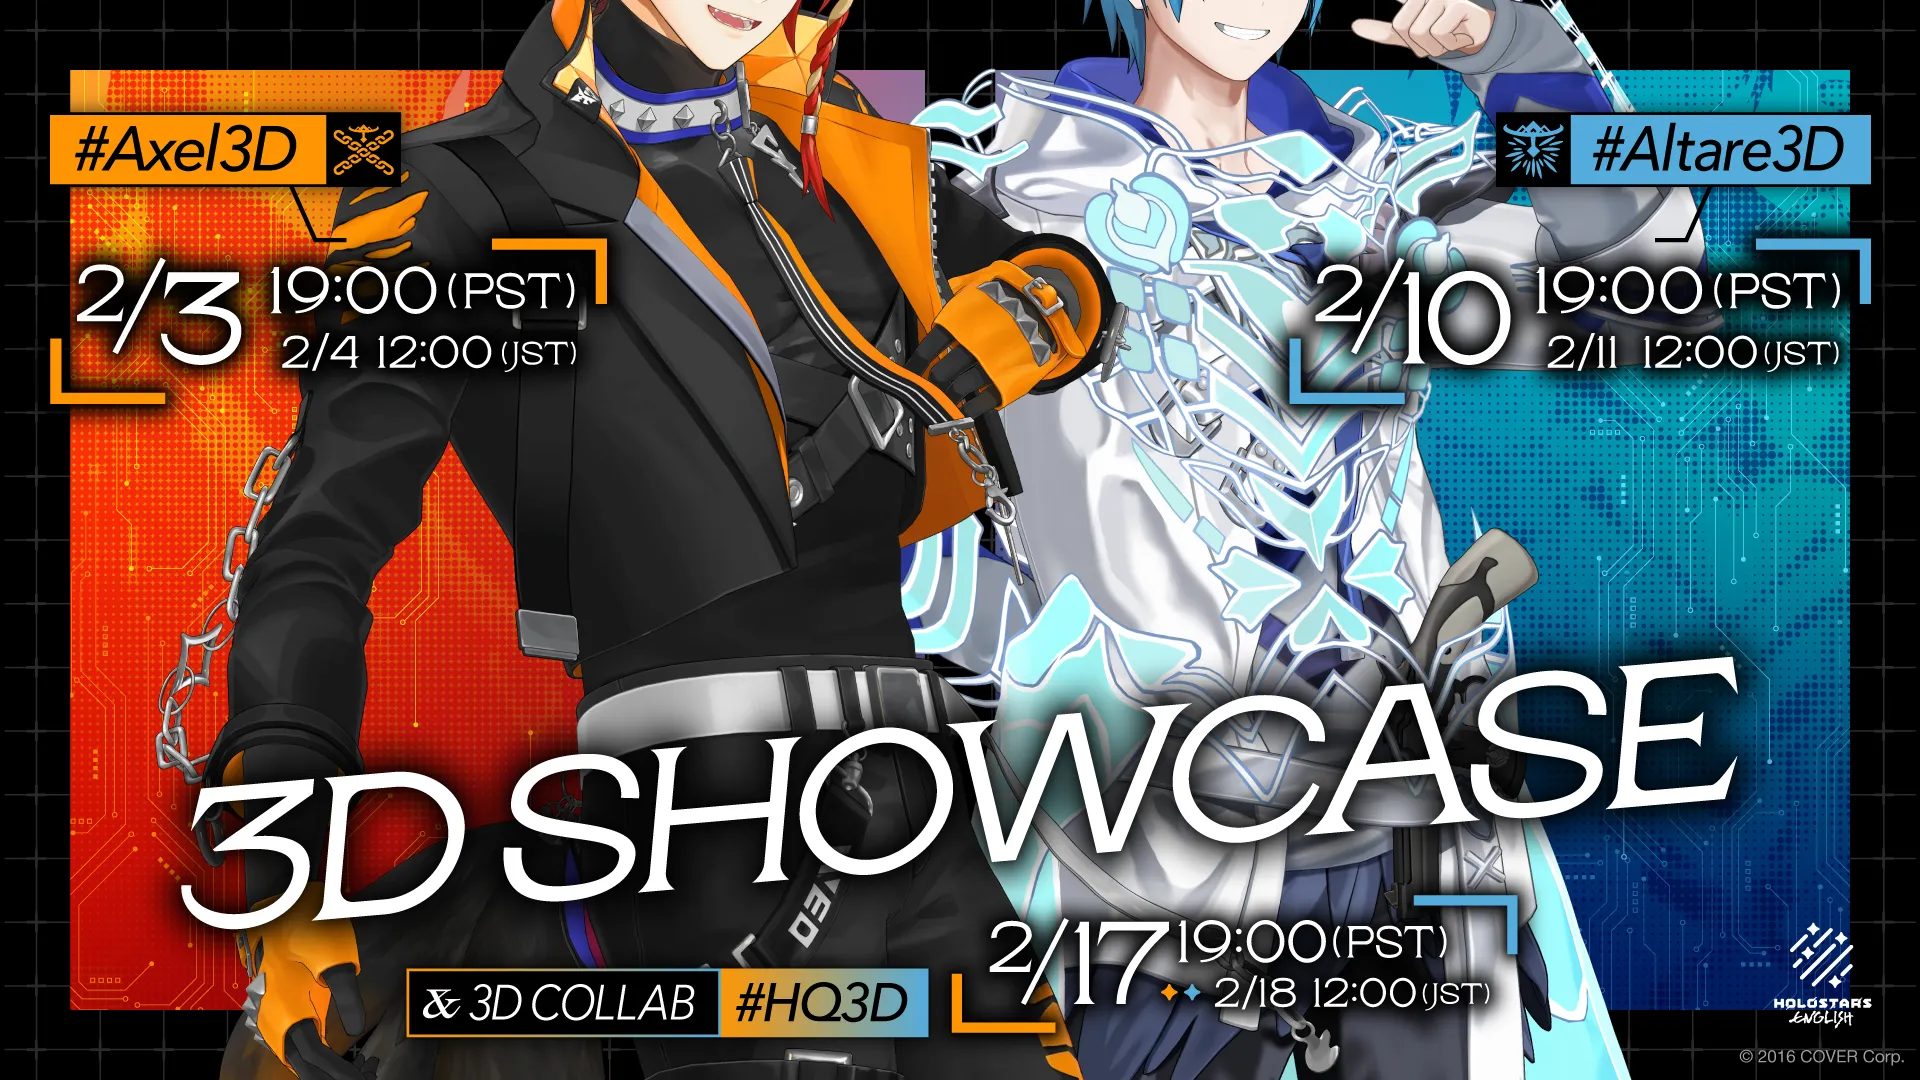 COVER Corporation Announces  3D Showcase for HOLOSTARS English Talents  Axel Syrios and Regis Altare